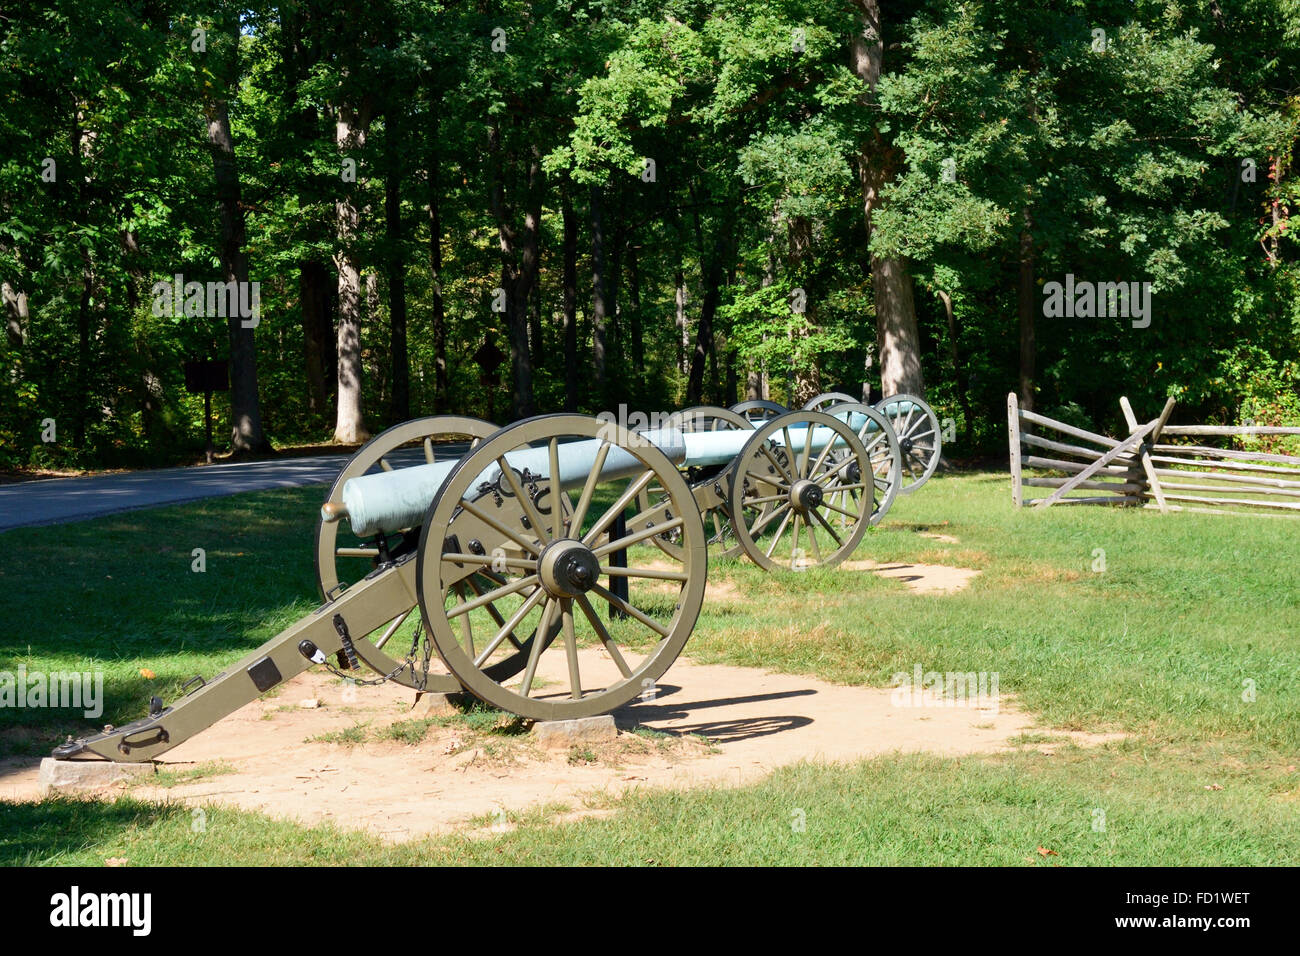 Confederate Cannon at the Site of the Virginia Memorial Stock Photo